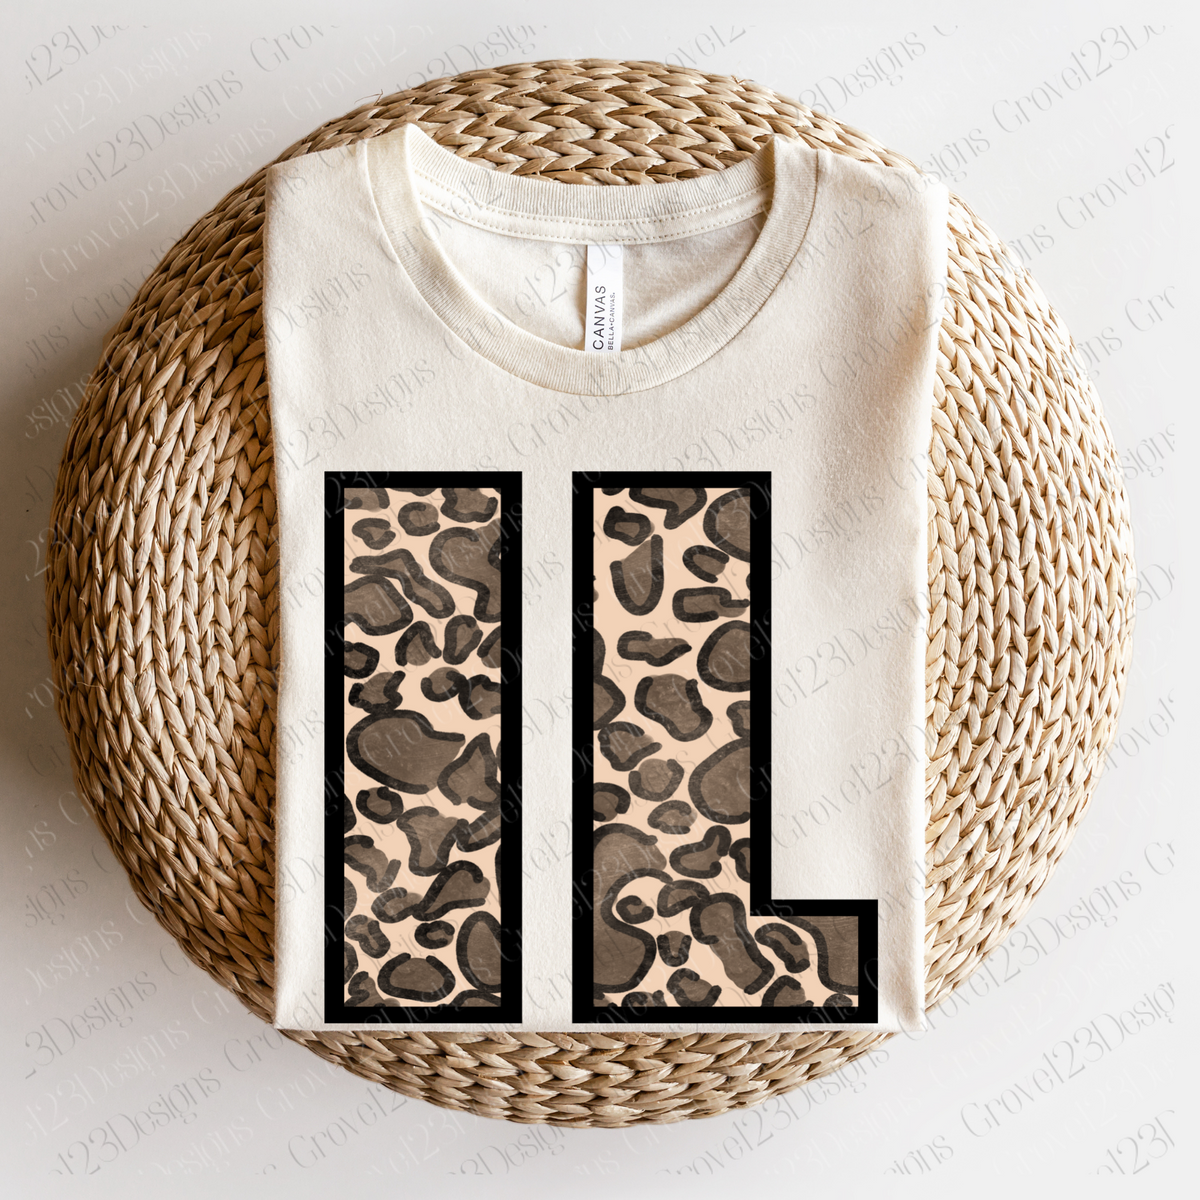 BUNDLE - All 50 States - Leopard State Initials